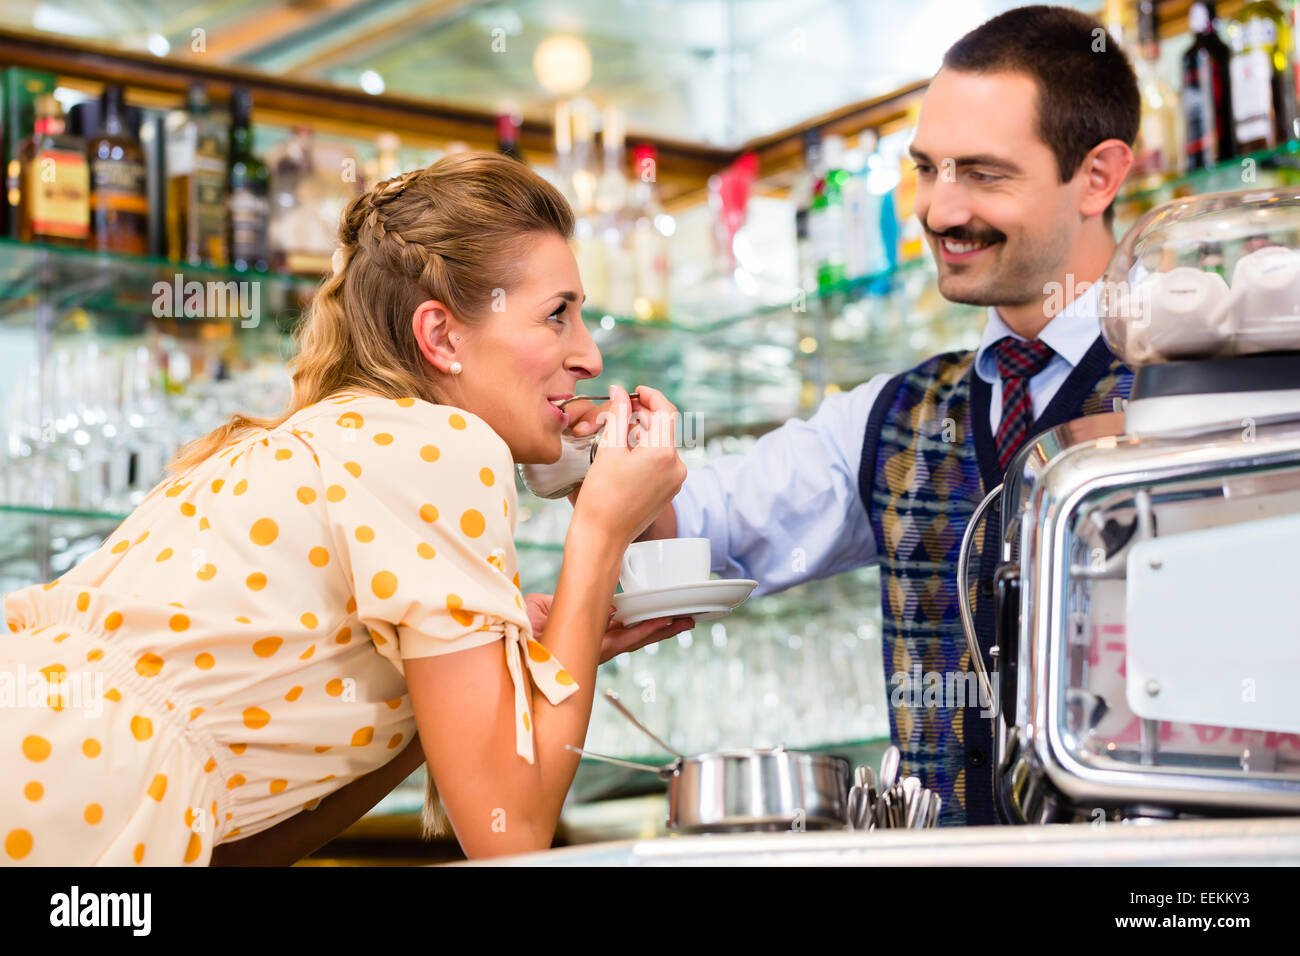 Girl in cafe or coffee bar flirting with barista who is busy preparing Cappuccino with professional machine Stock Photo